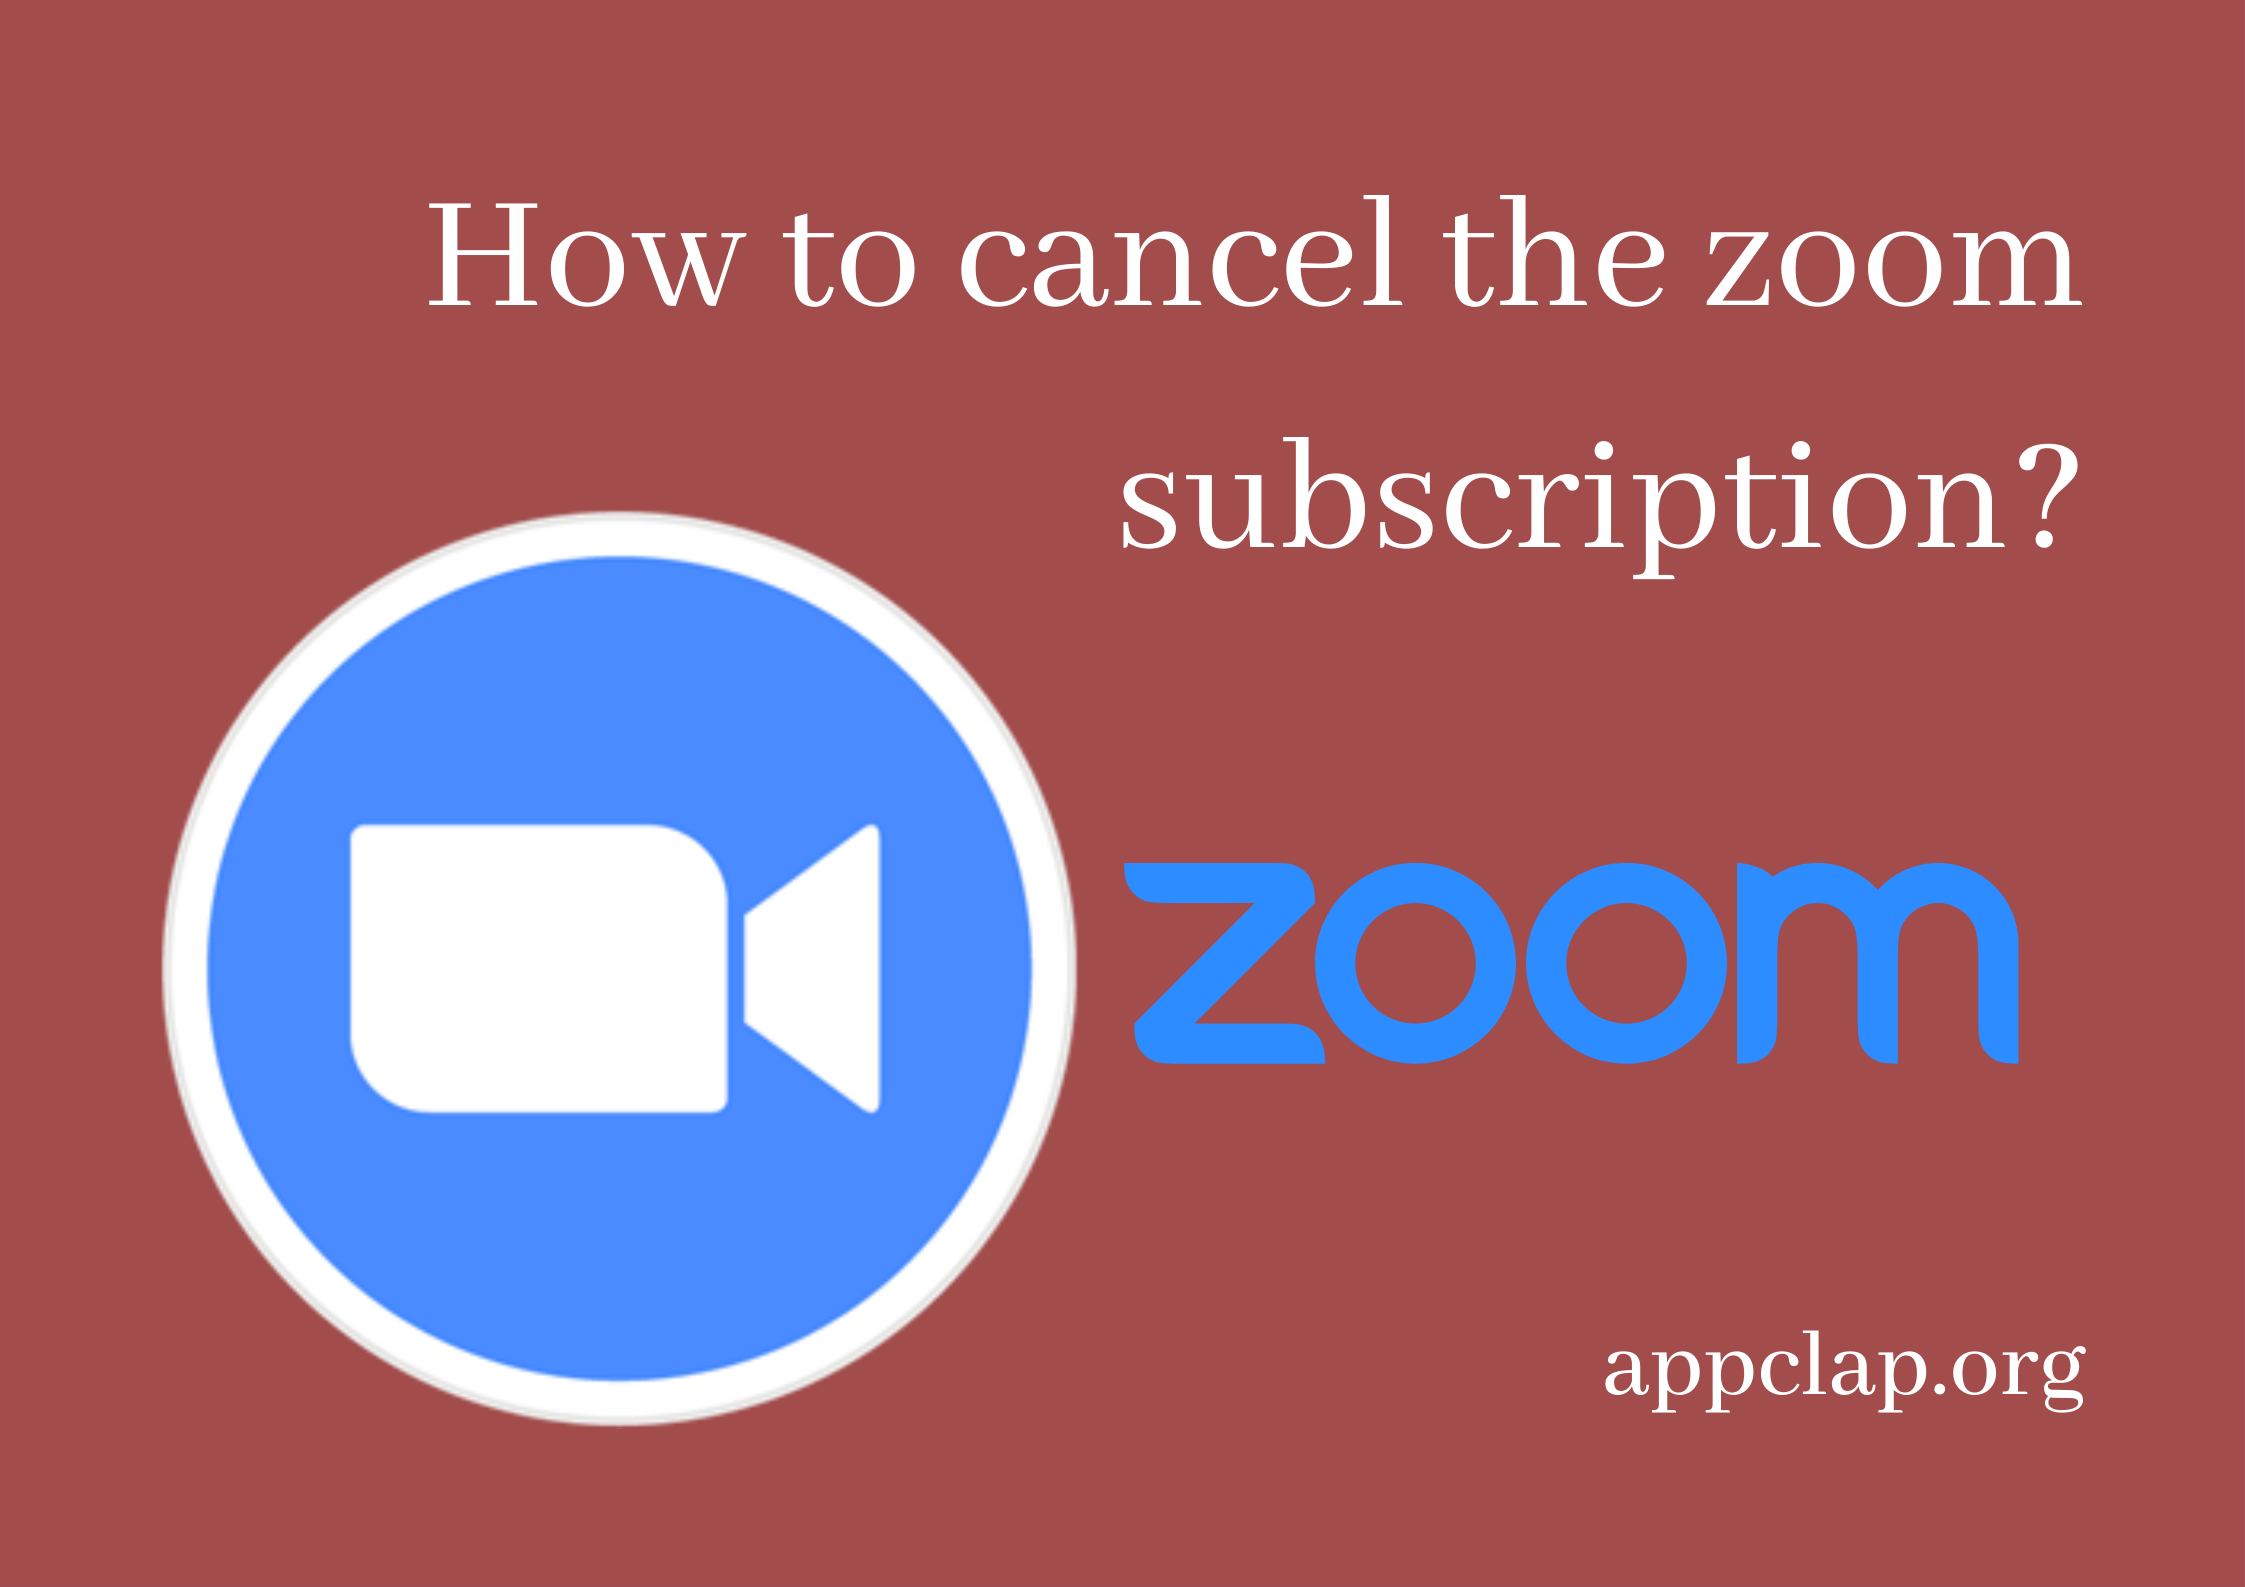 How to cancel the zoom subscription?